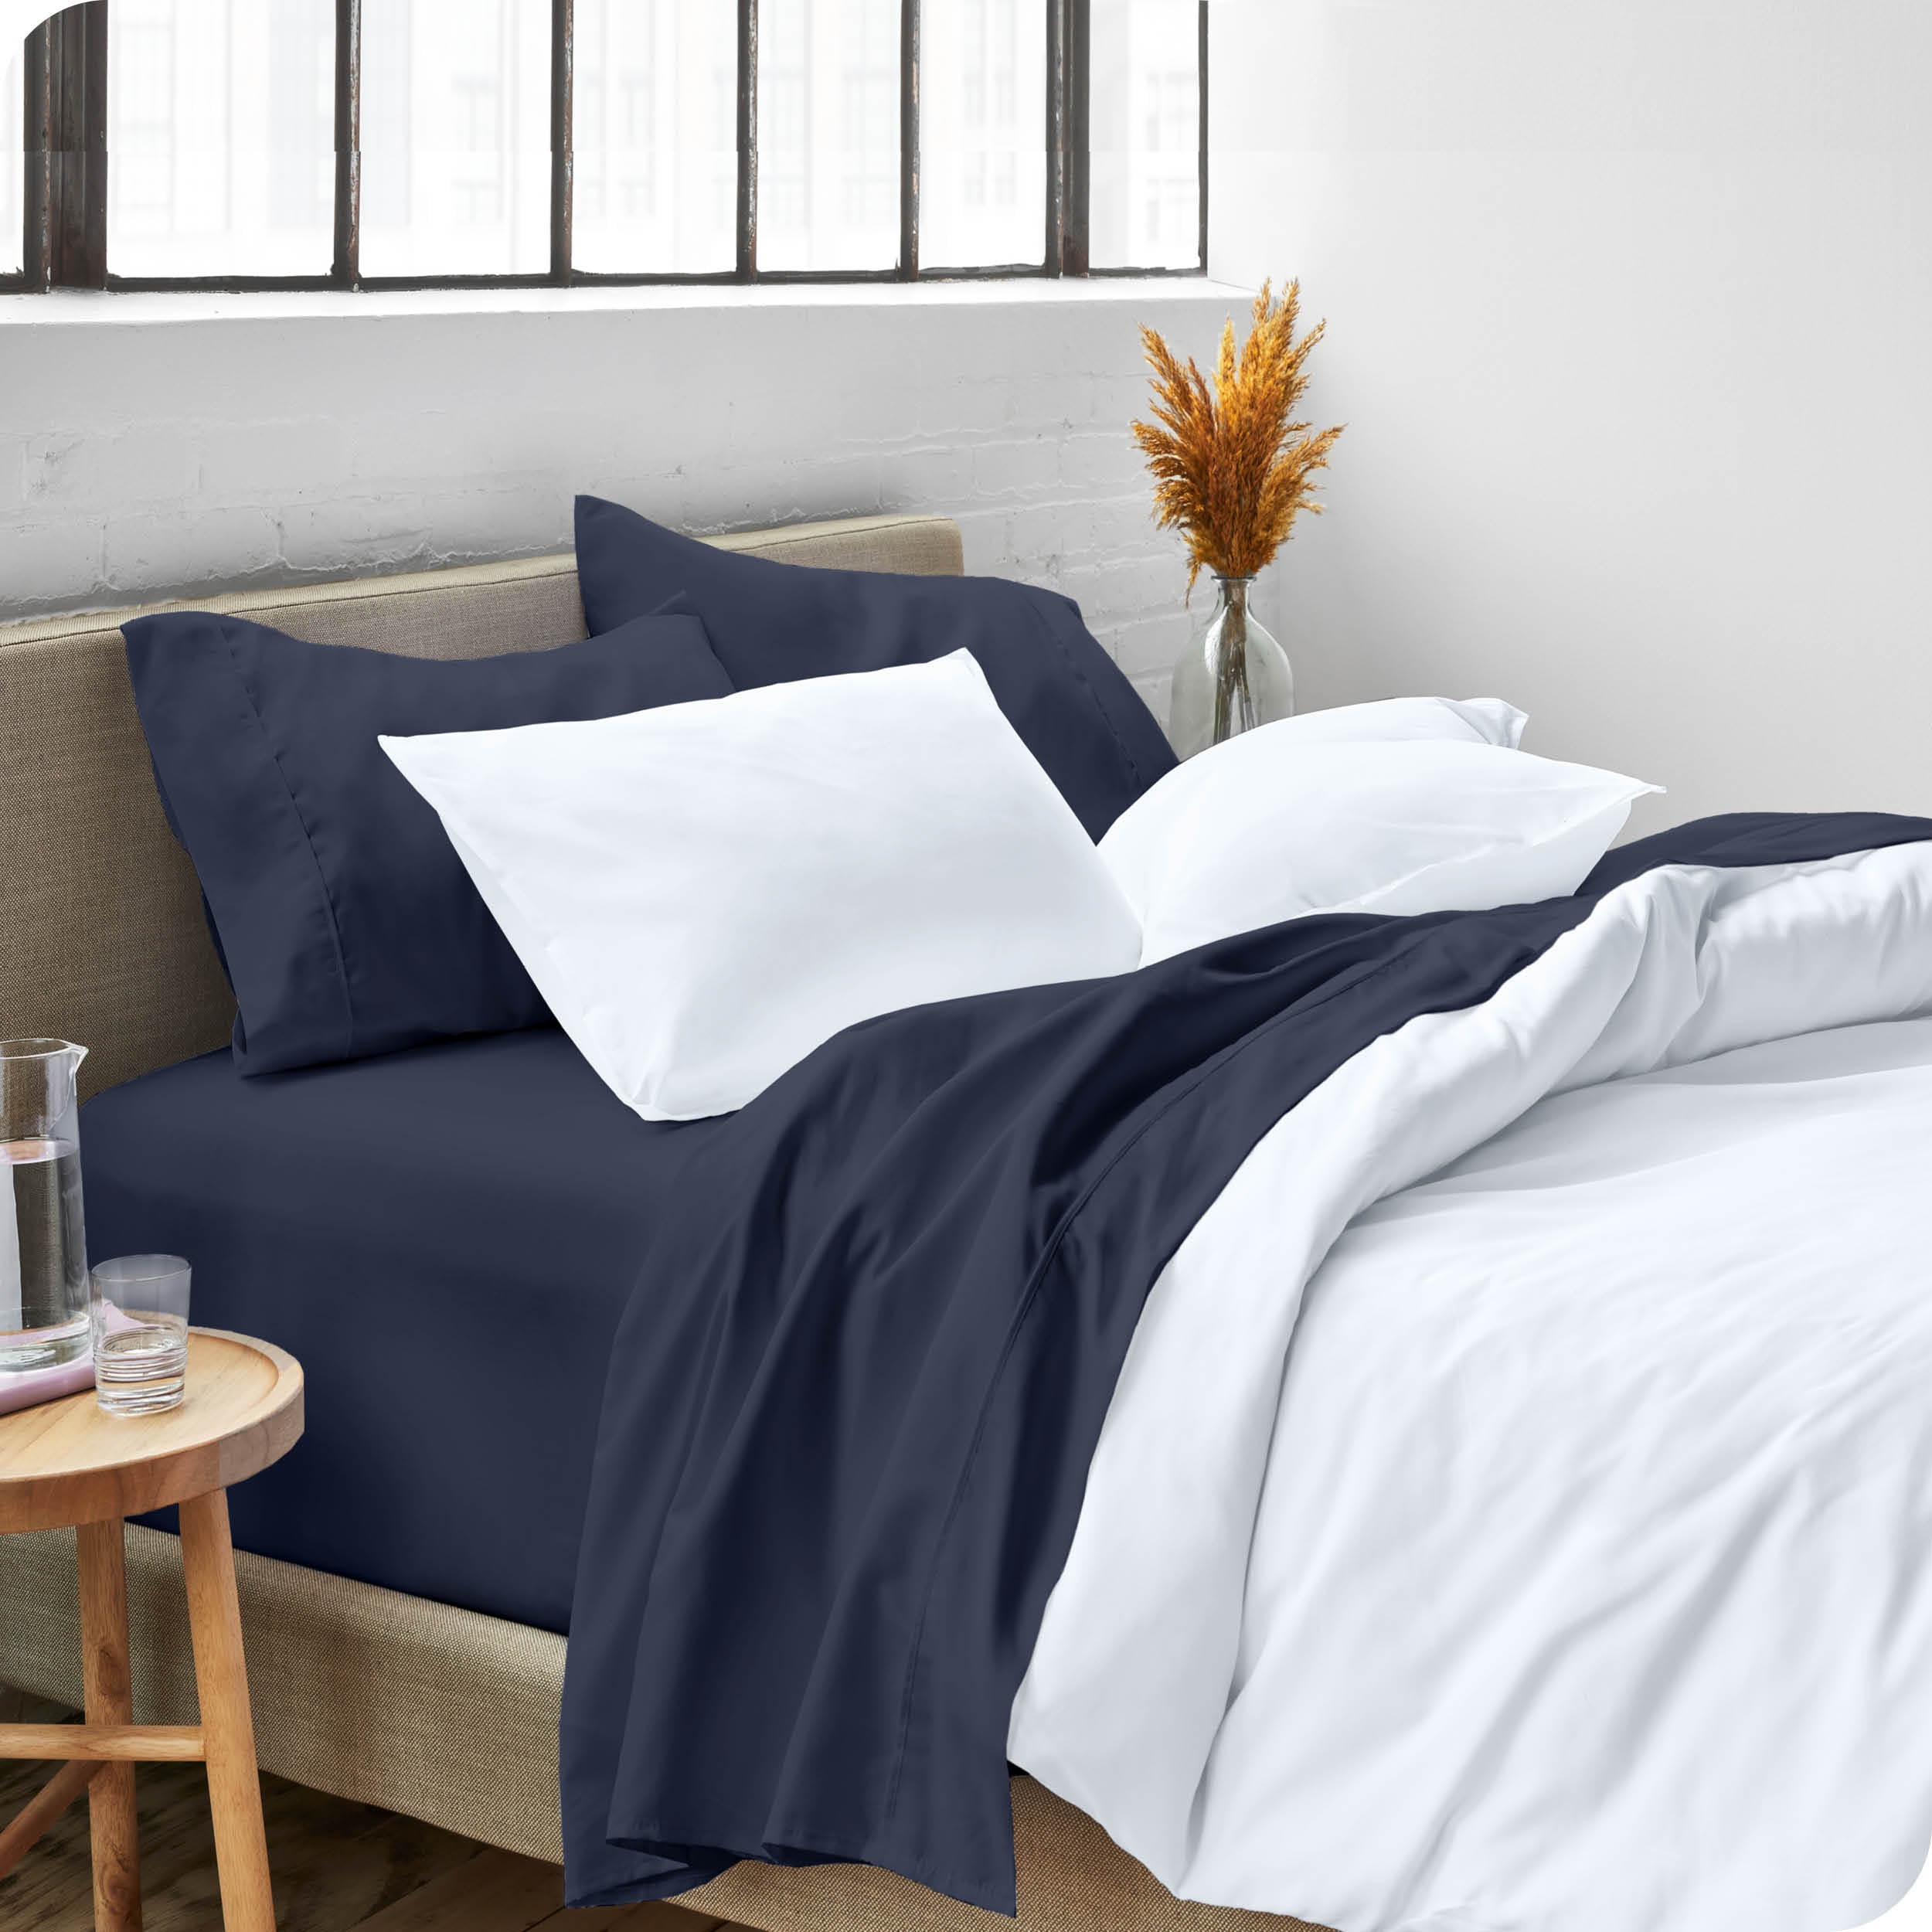 A modern bed made with a microfiber sheet set and duvet set. The duvet set and sheet set are folded over part way down the bed.